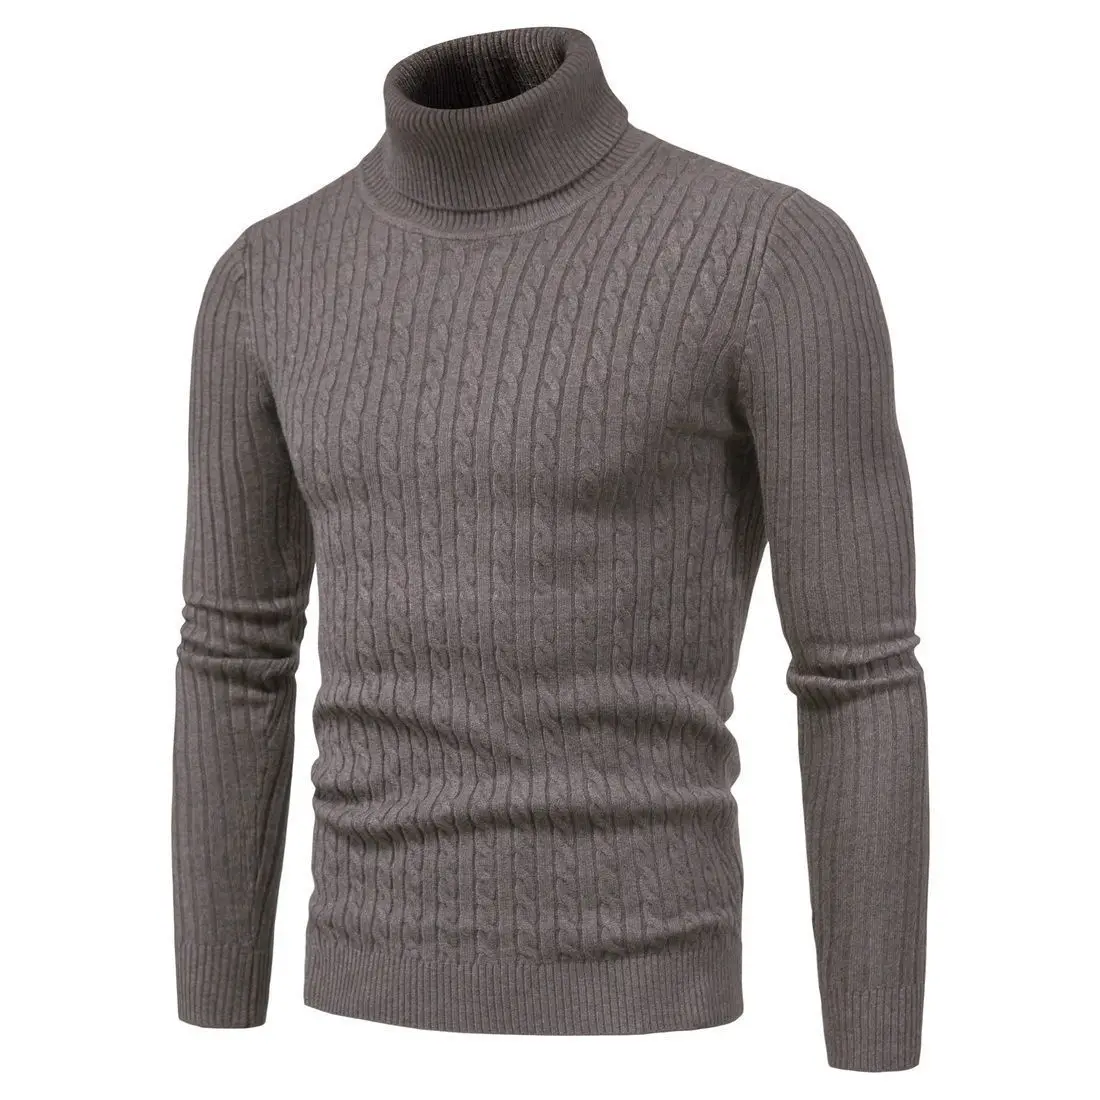 2022 New Winter Turtleneck Thick Mens Sweaters Casual Turtle Neck Solid Color Quality Warm Slim Turtleneck Sweaters Pullover Men